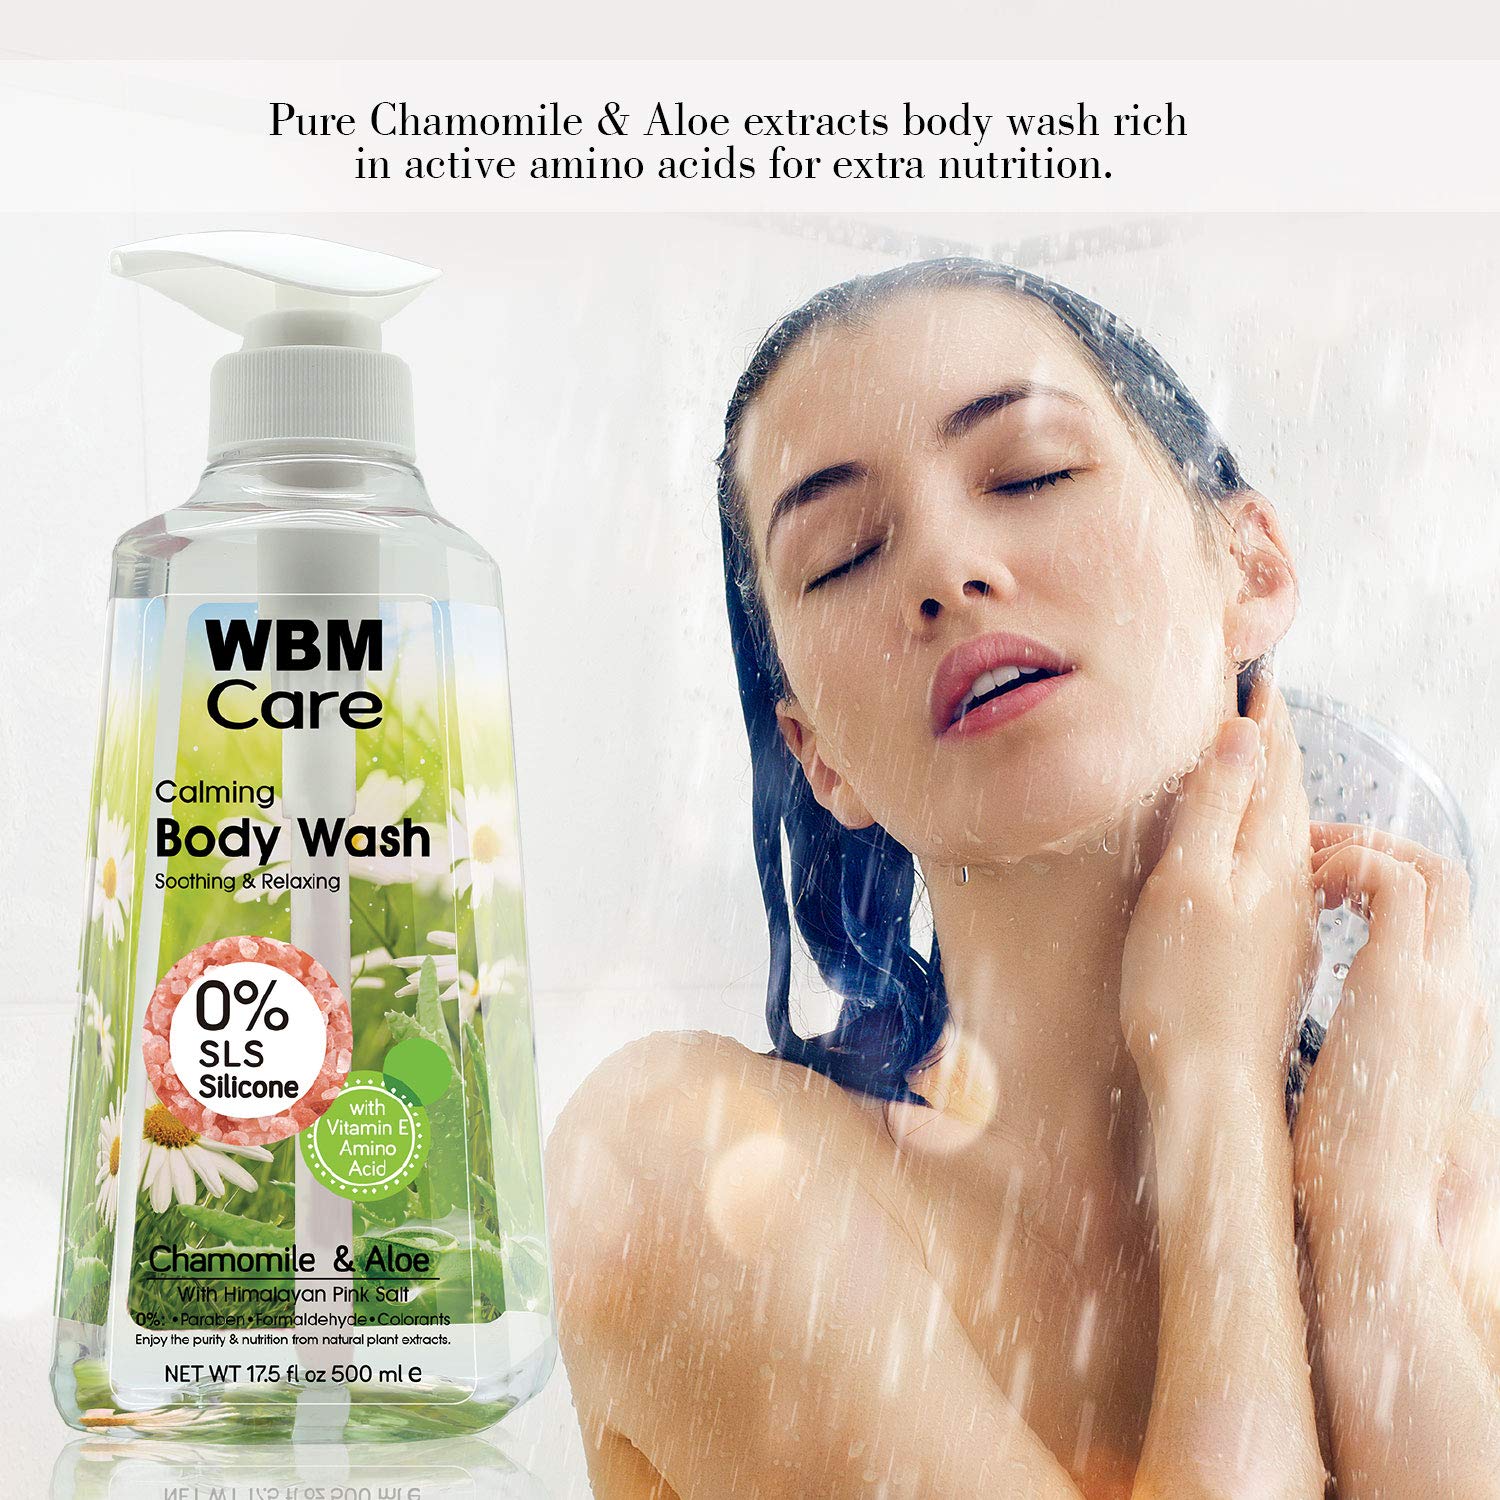 WBM Care Natural Body Wash, Rich in Chamomile & Aloe with Himalayan Pink Salt, Calming & Relaxing, Liquid Shower Gel, 17.5 Oz